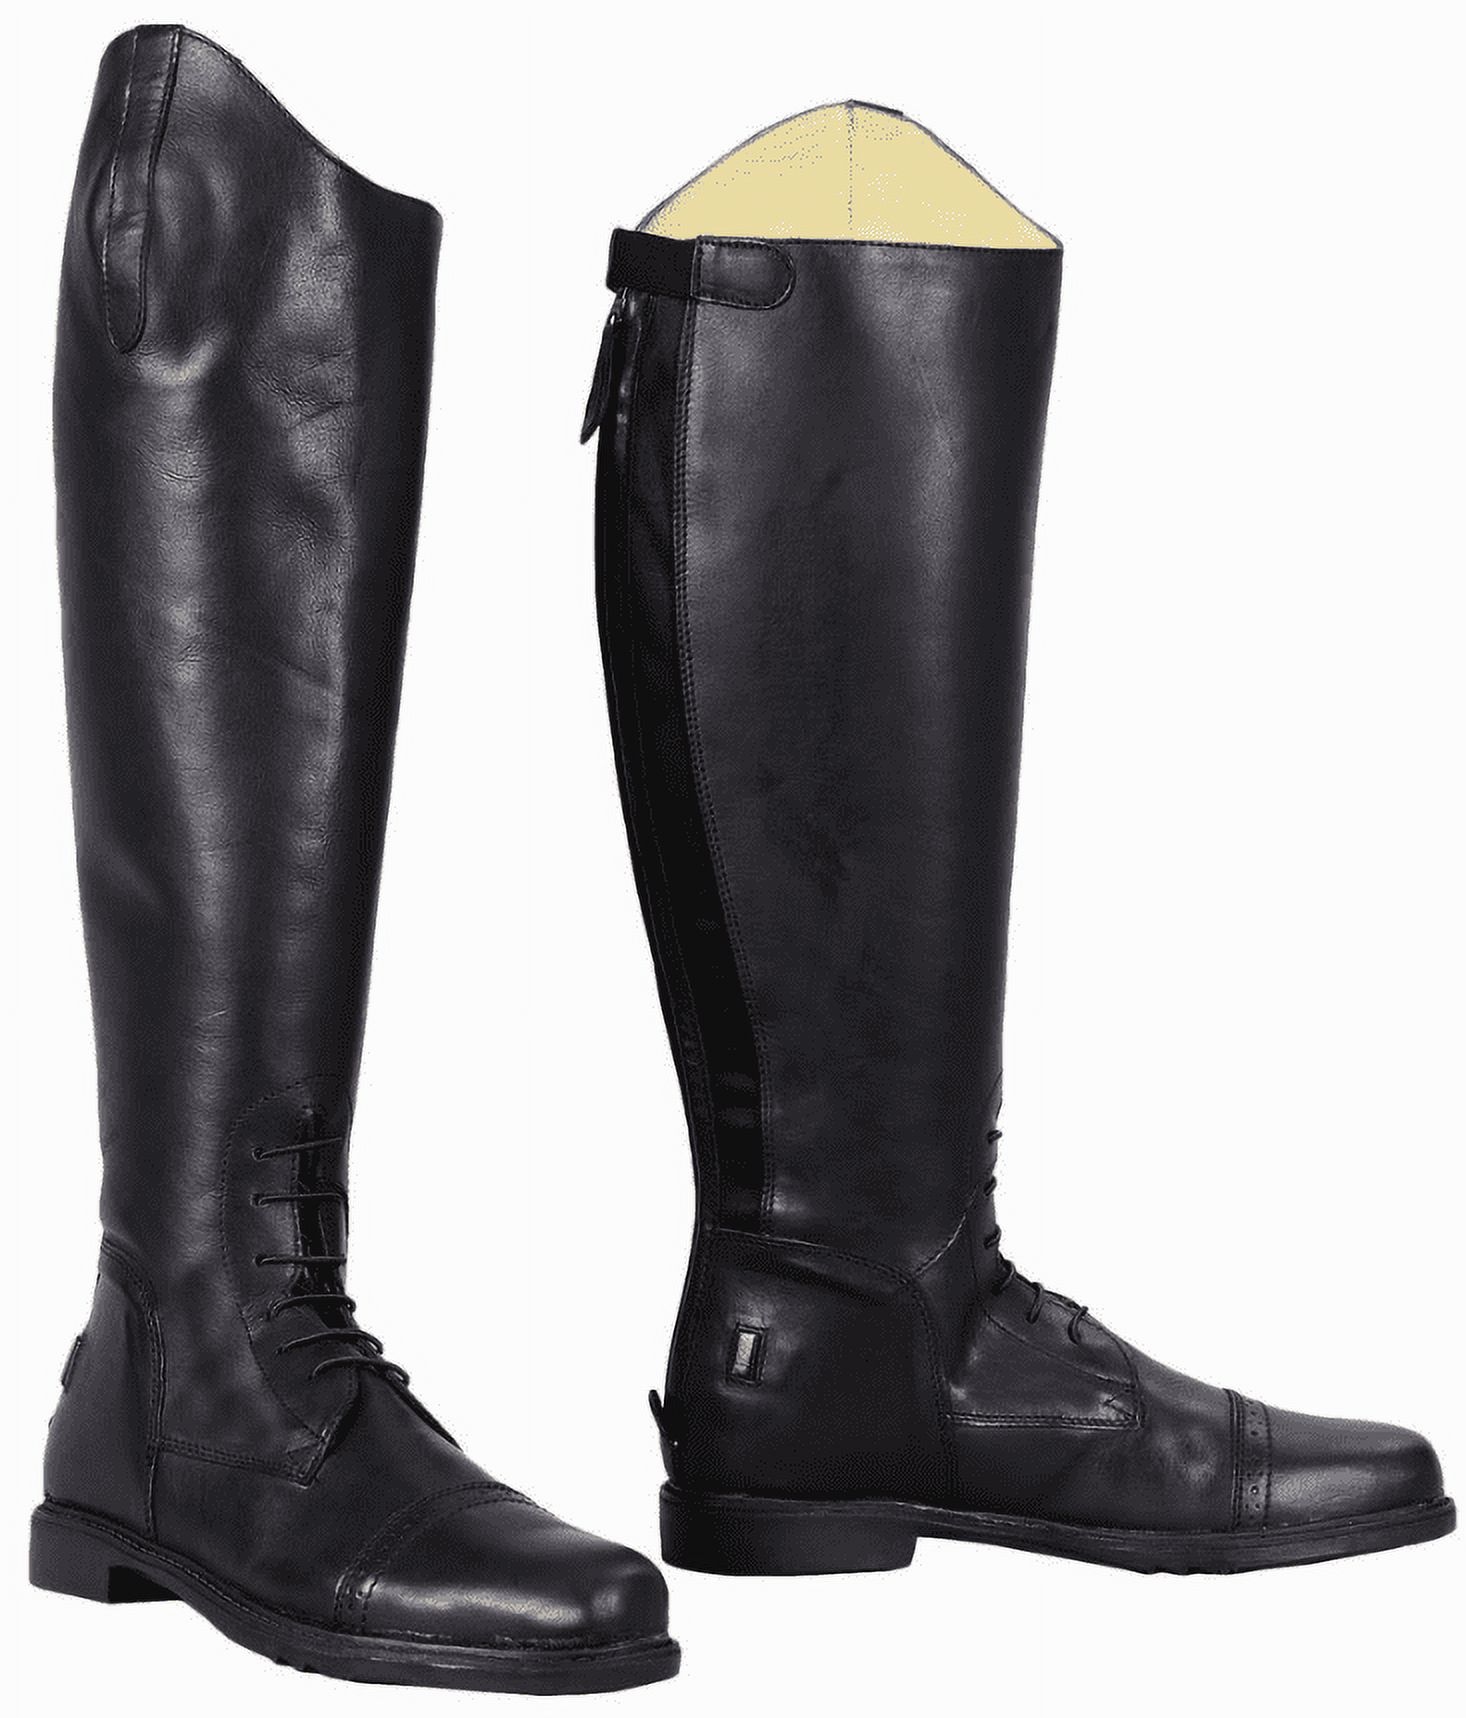 Mens Baroque Field Boots - image 1 of 4